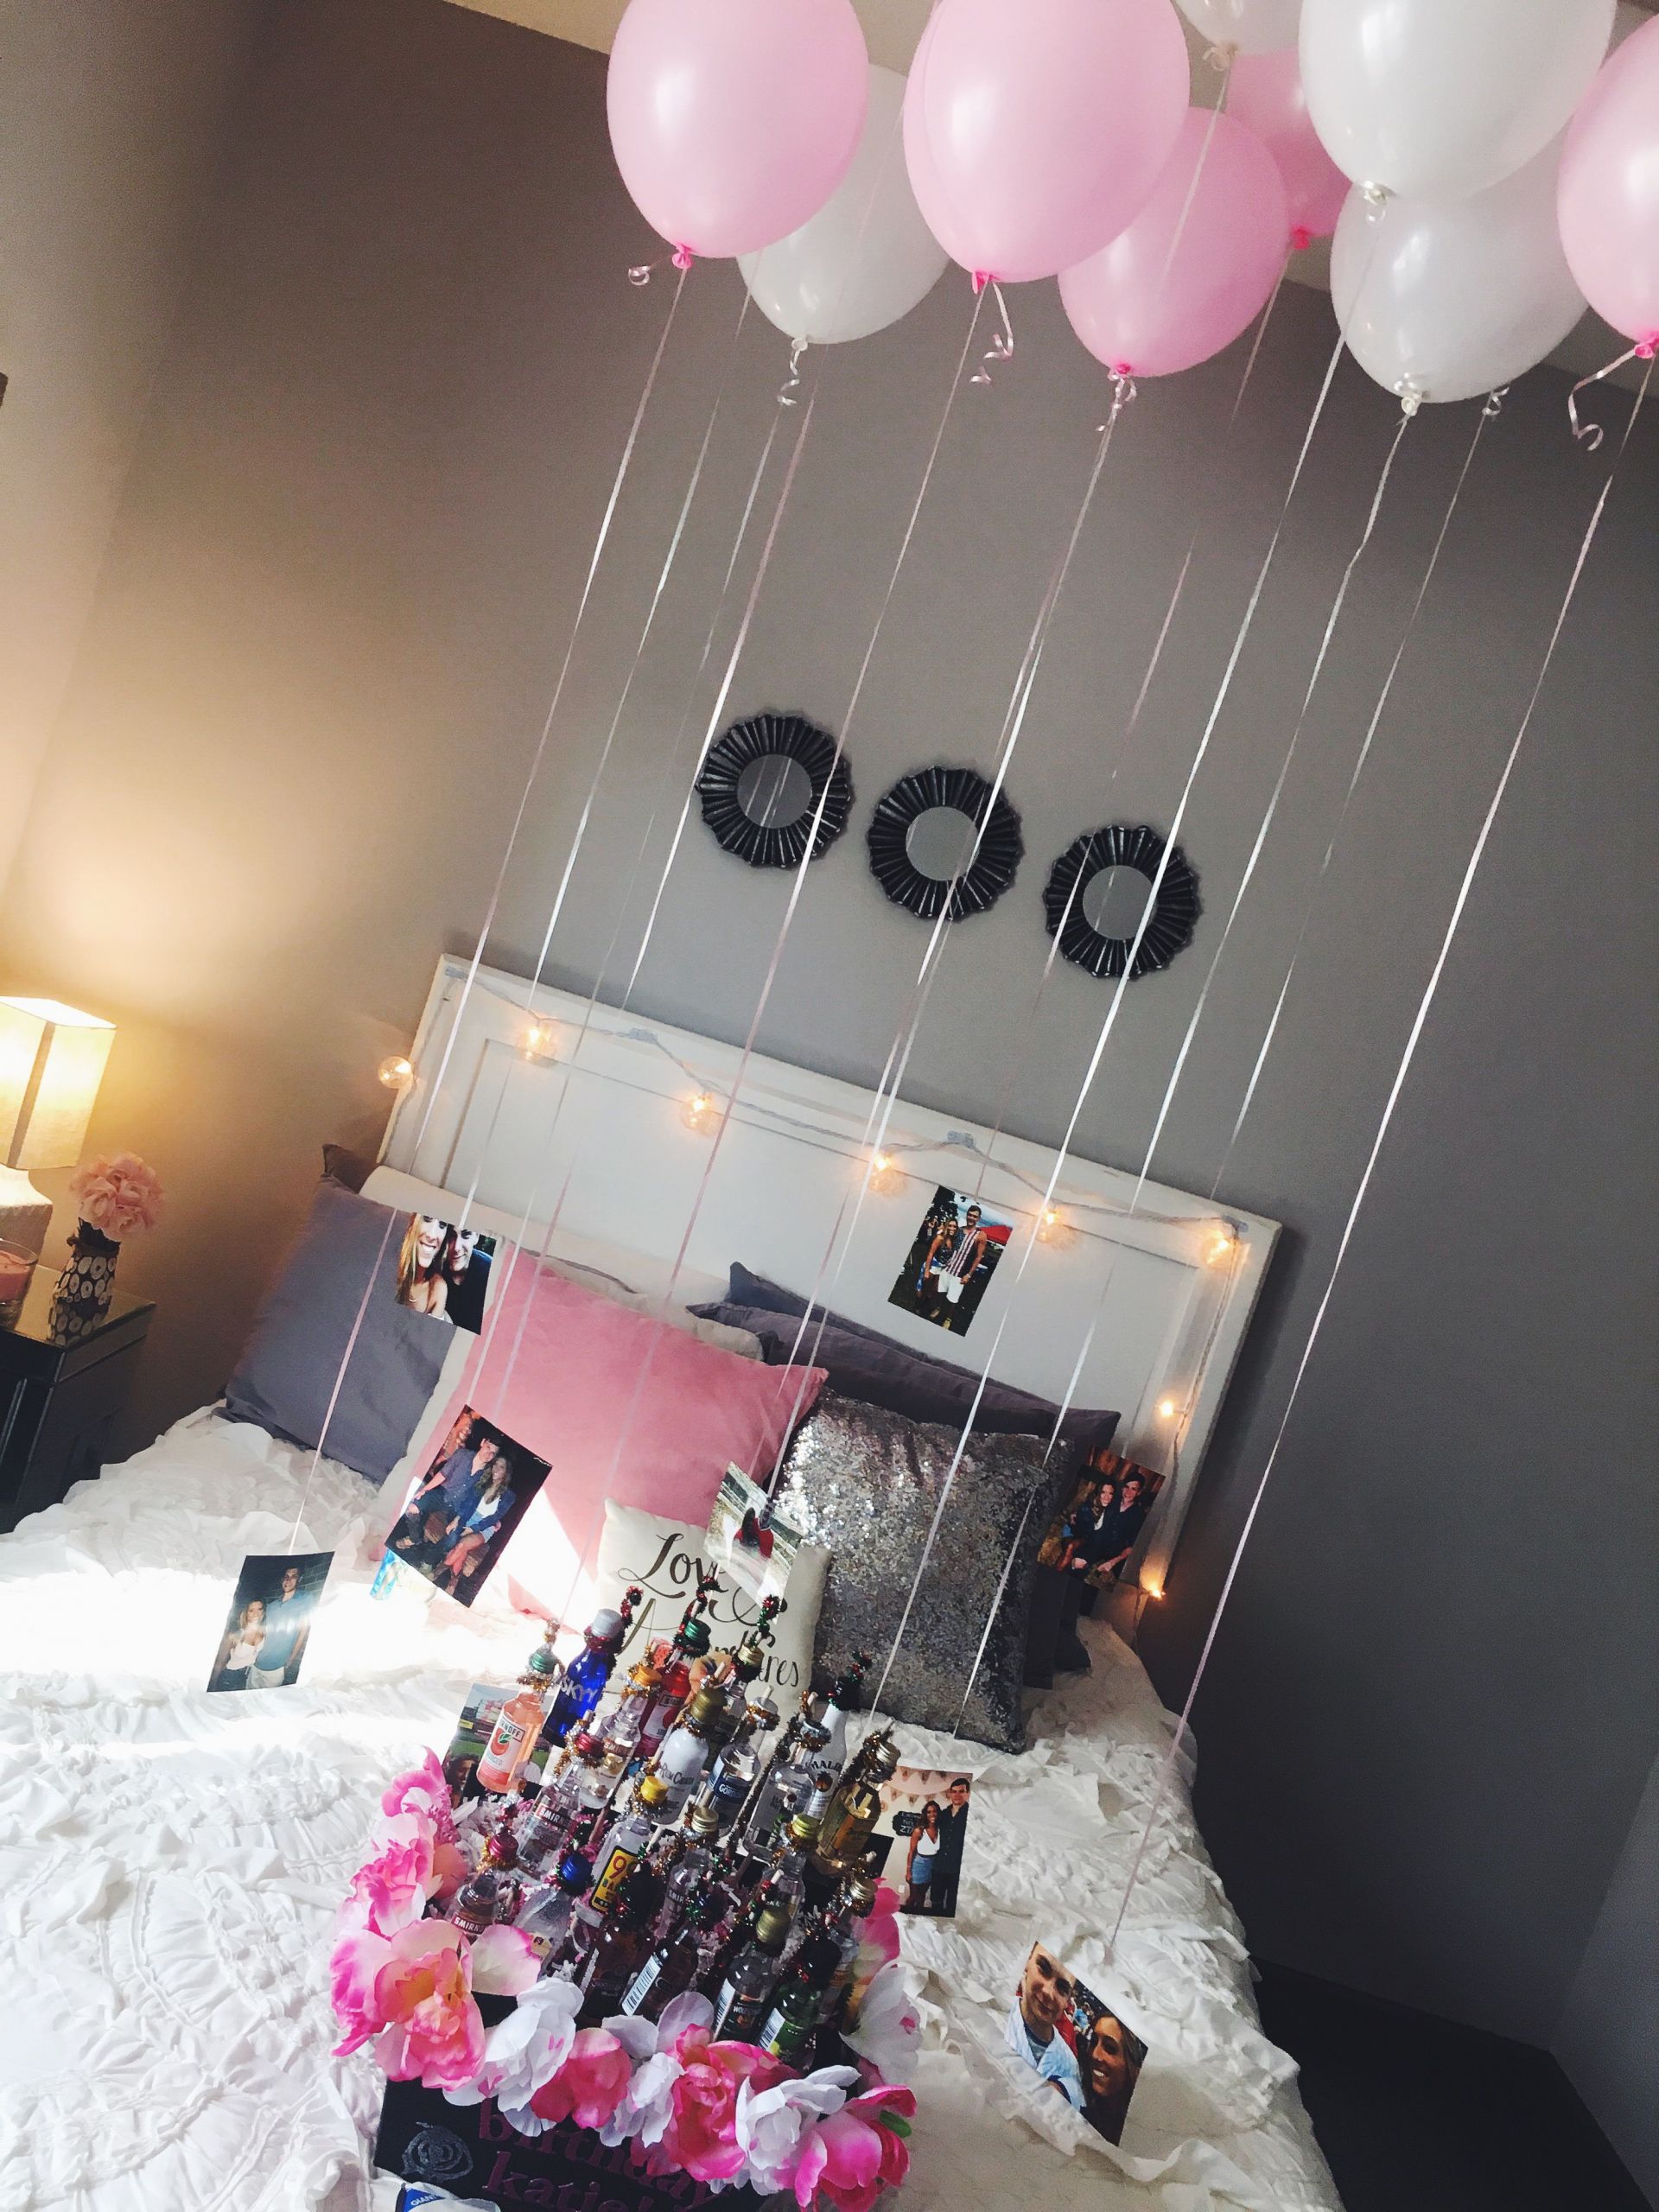 Ideas For Girlfriends Birthday Gift
 easy and cute decorations for a friend or girlfriends 21st